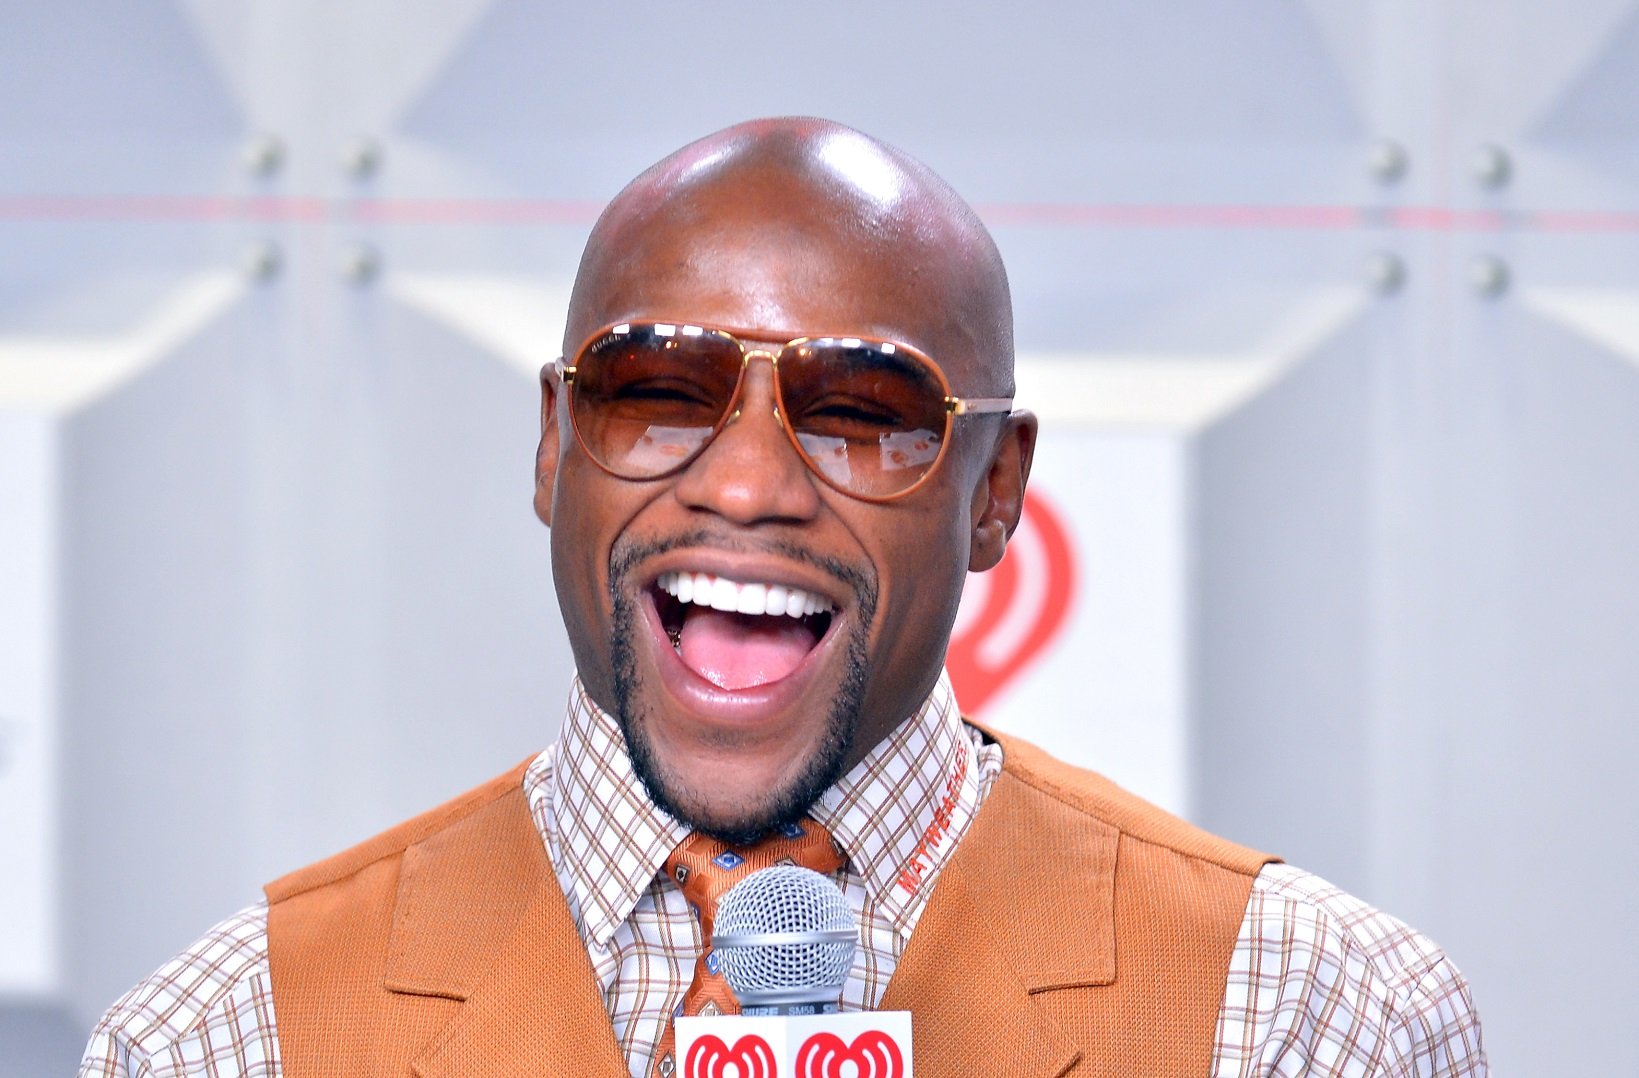 Floyd Mayweather boasts he will make $70 million for 36 minutes of